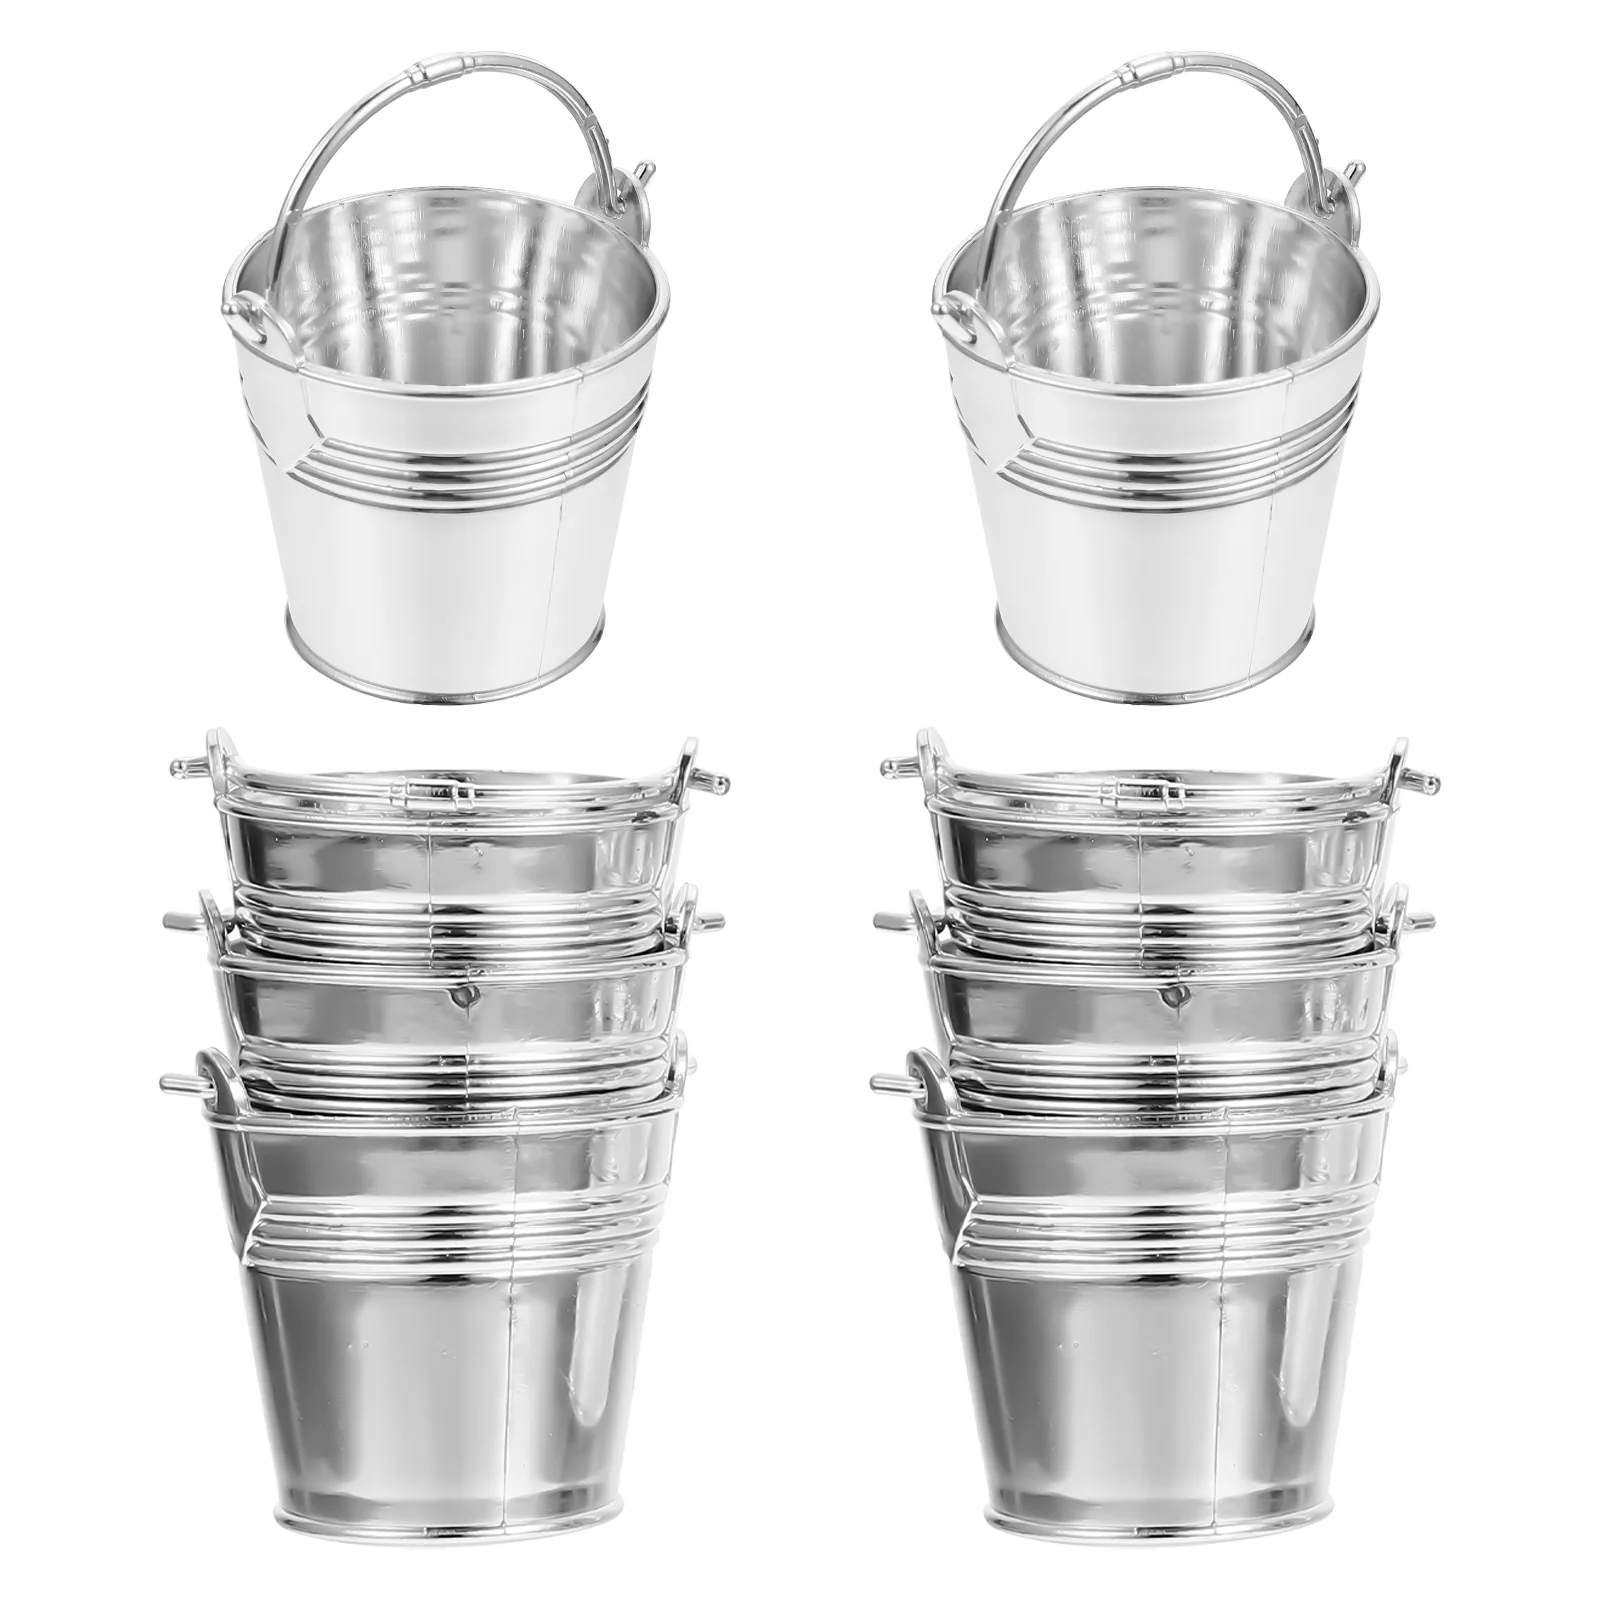 

Buckets Bucket Mini Metaltin Partywith Galvanized Pails Candy Snack Handles Holder Favors Snacks Flower Ice Favor Tinplate